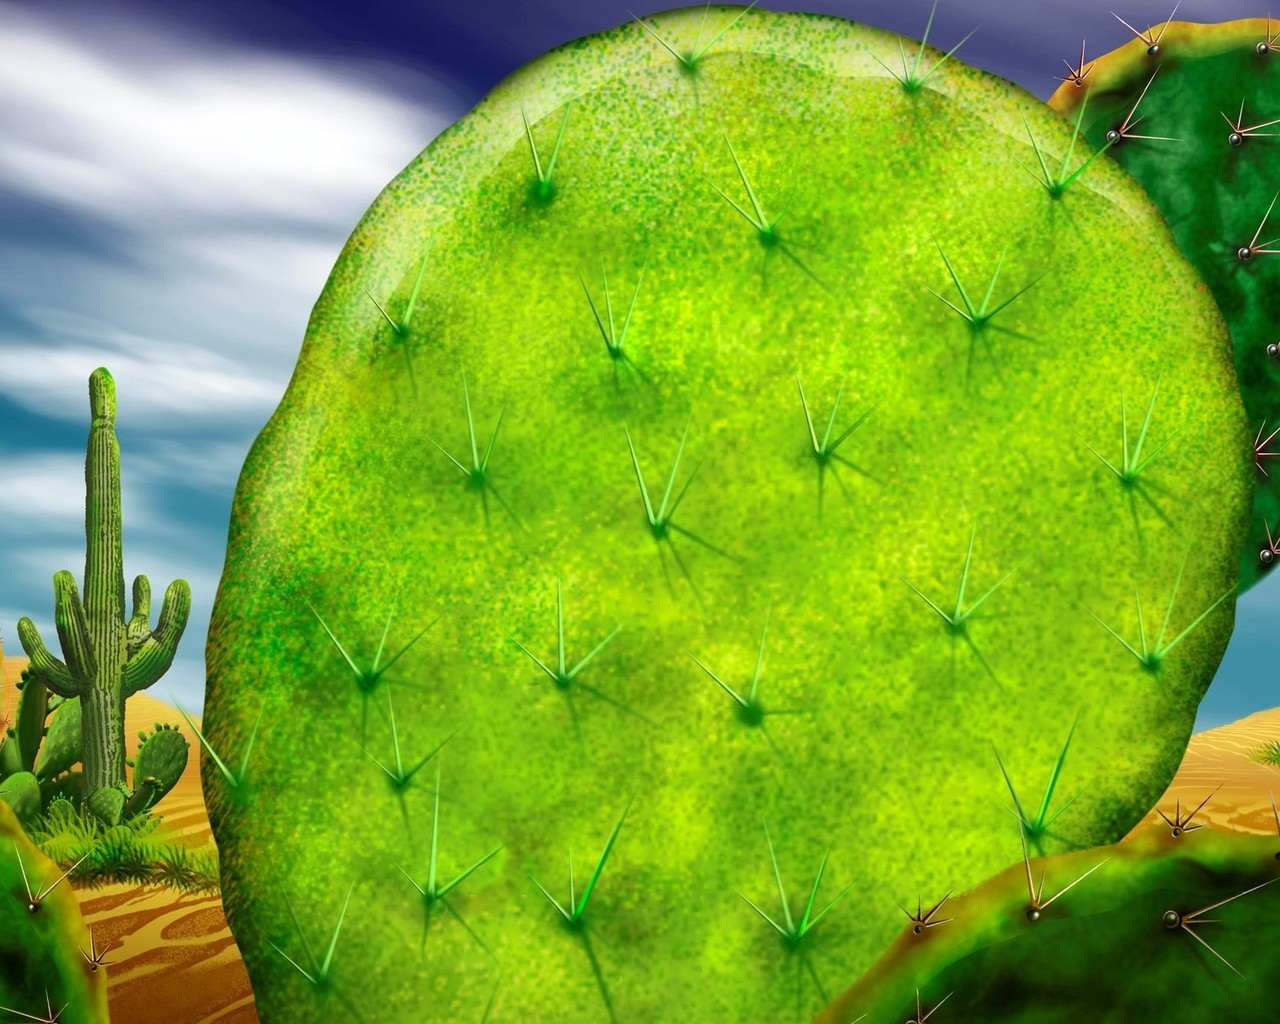 Cactus for 1280 x 1024 resolution